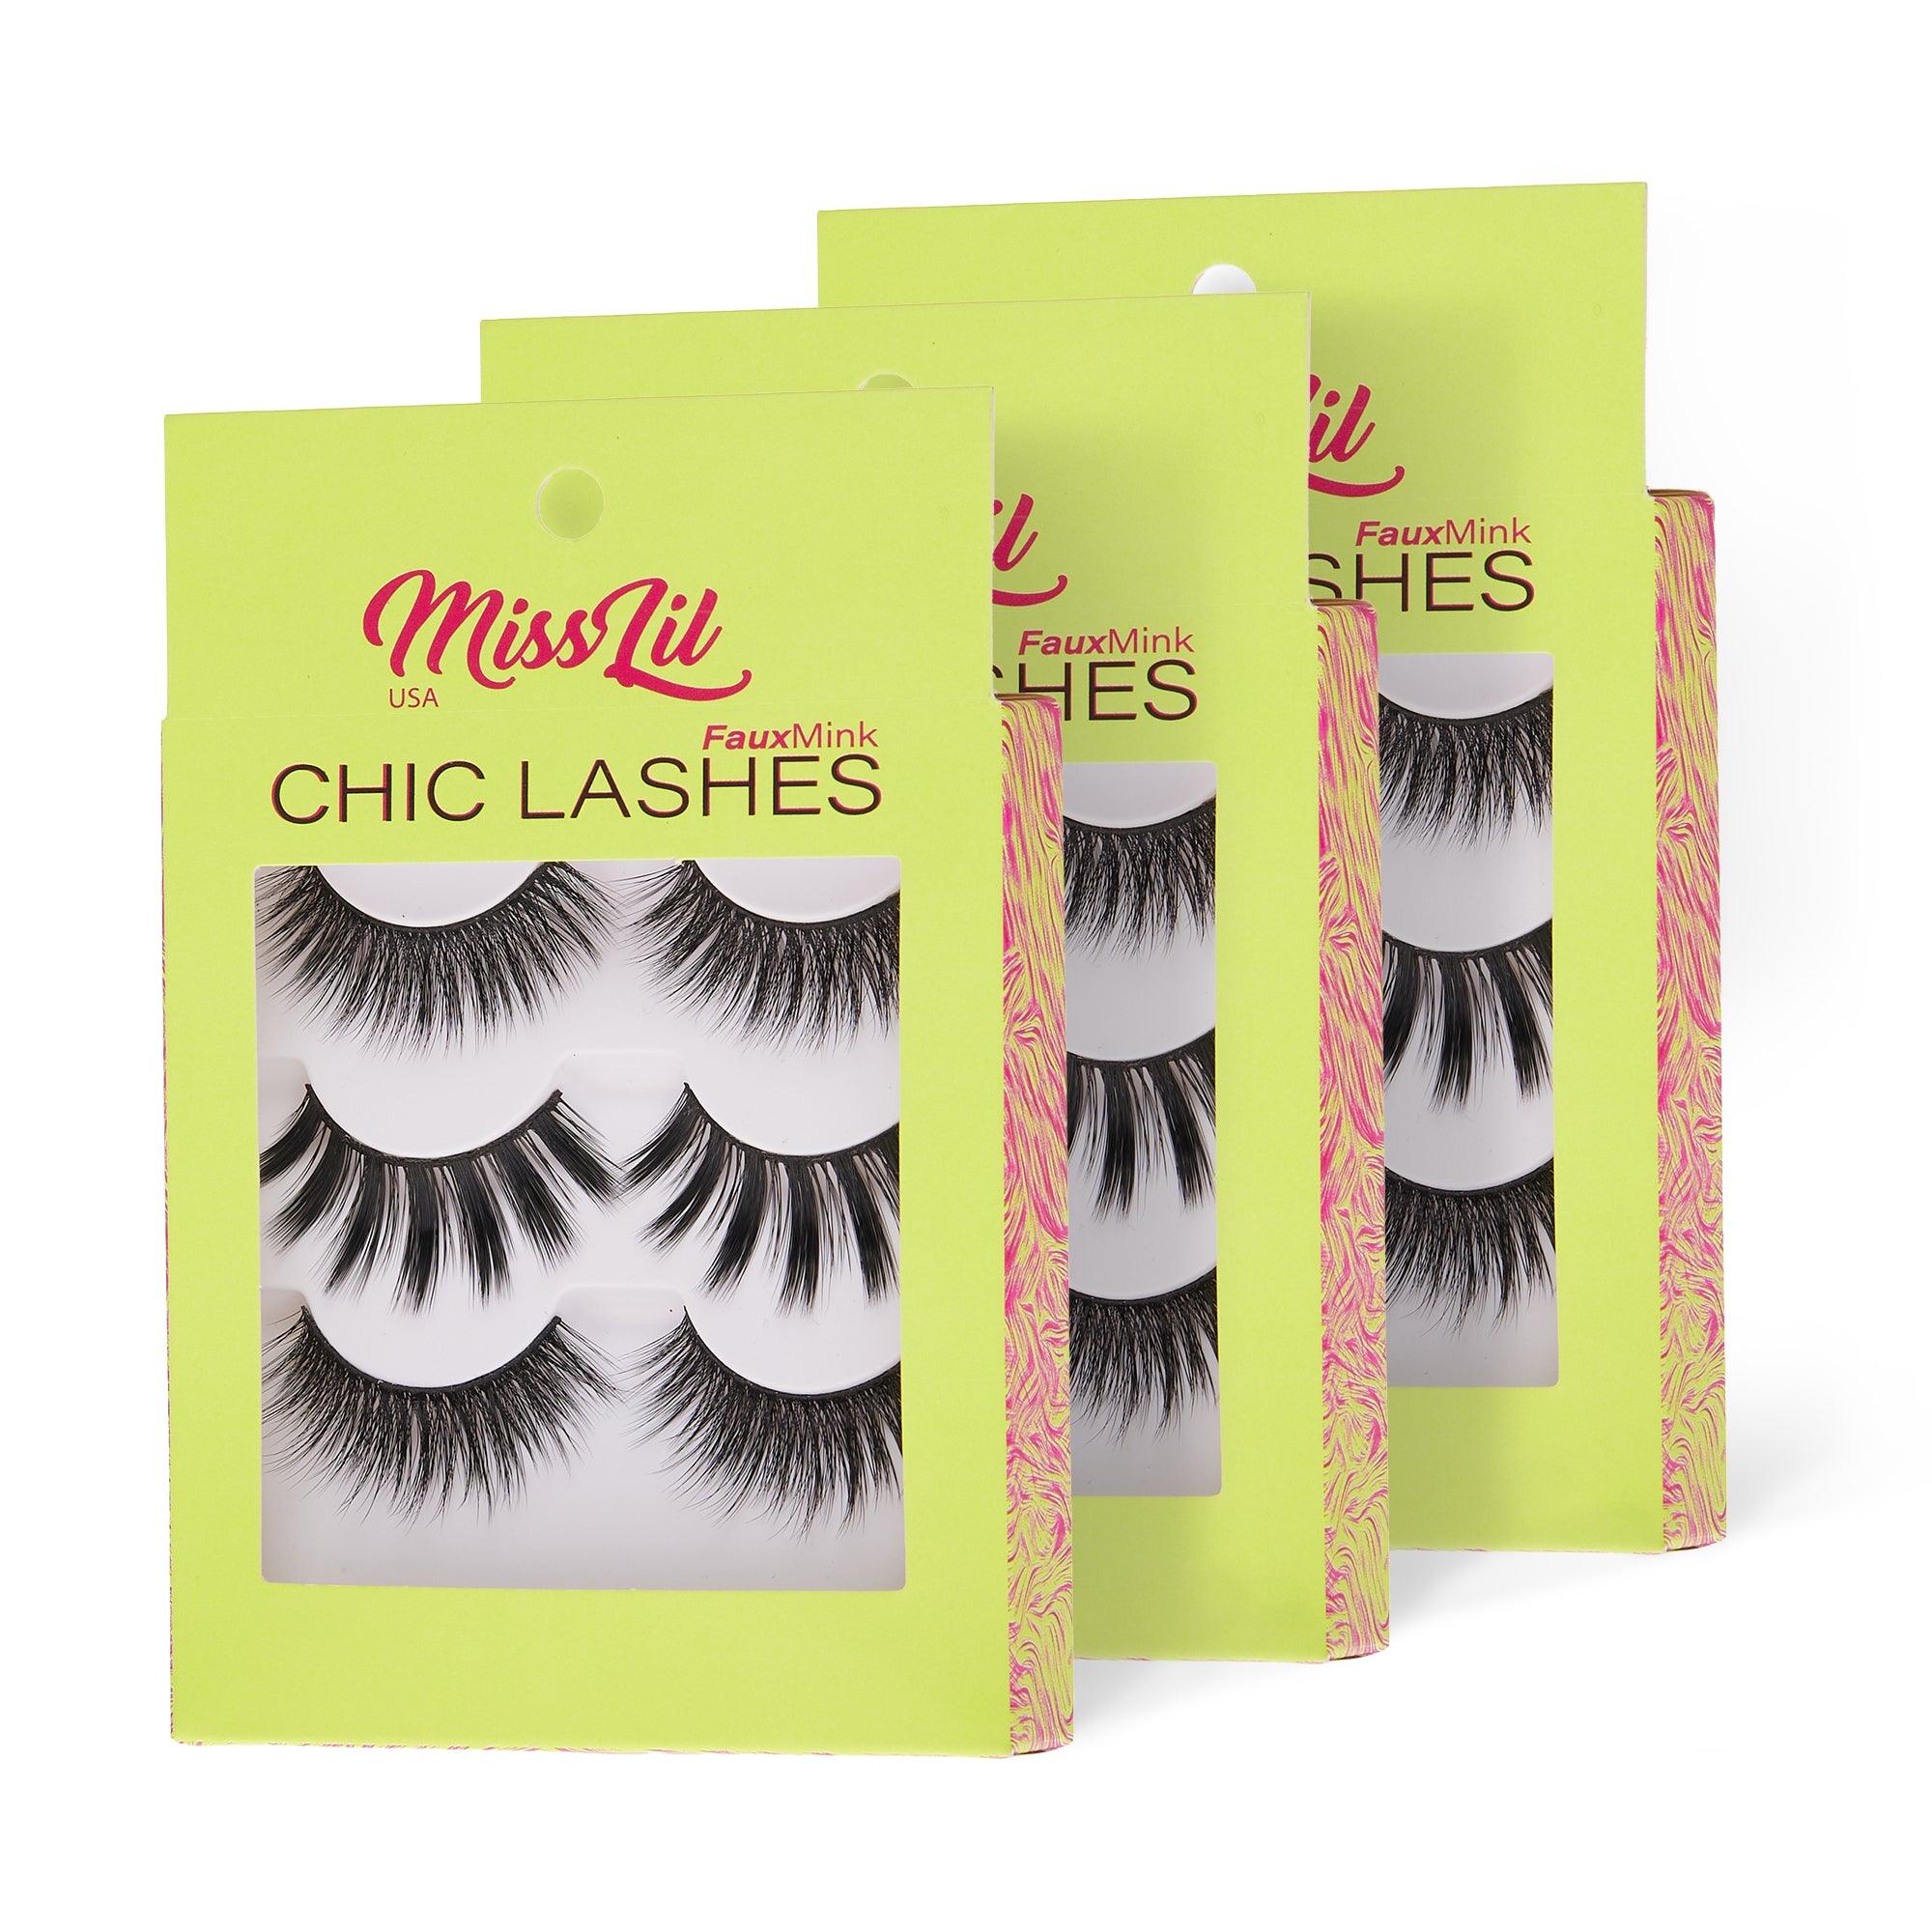 3-Pair Faux Mink Eyelashes - Chic Lashes Collection #2 - Pack of 3 - Miss Lil USA